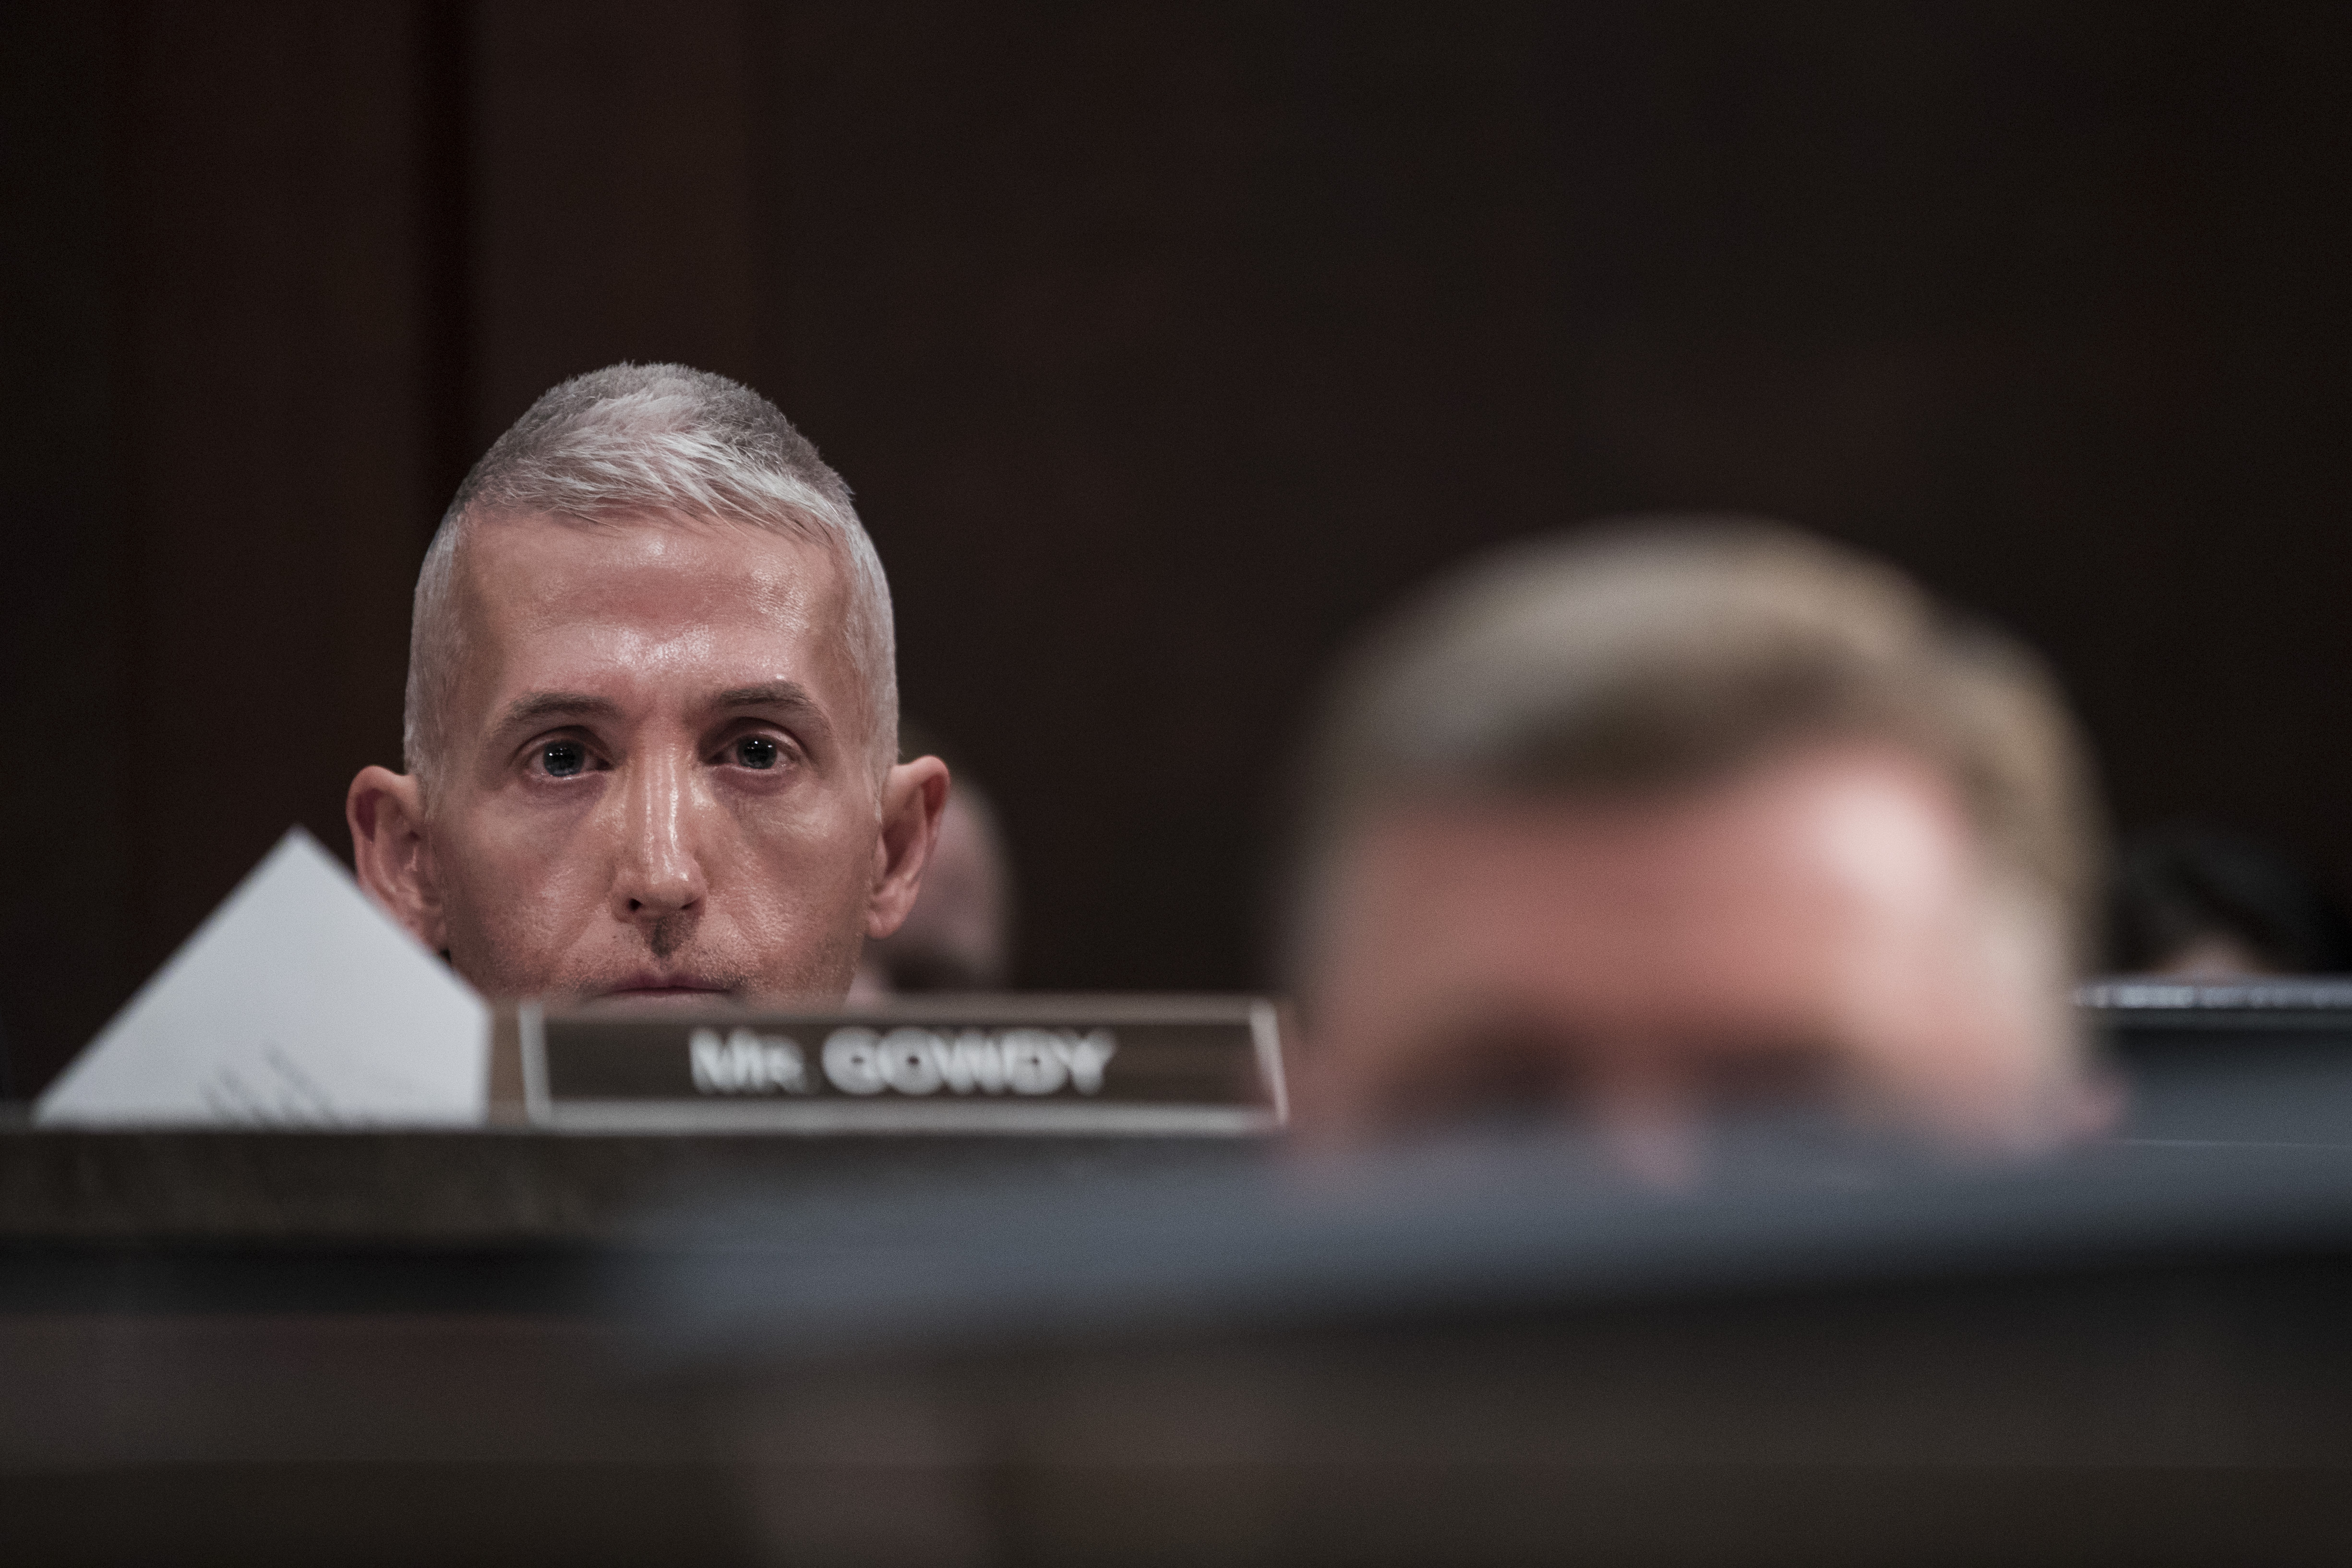 WASHINGTON, DC - MAY 23: Rep. Trey Gowdy (R-SC) questions former Director of the U.S. Central Intelligence Agency (CIA) John Brennan during testimony before the House Permanent Select Committee on Intelligence on Capitol Hill, May 23, 2017 in Washington, DC. Brennan is discussing the extent of Russia's meddling in the 2016 U.S. presidential election and possible ties to the campaign of President Donald Trump. (Photo by Drew Angerer/Getty Images)